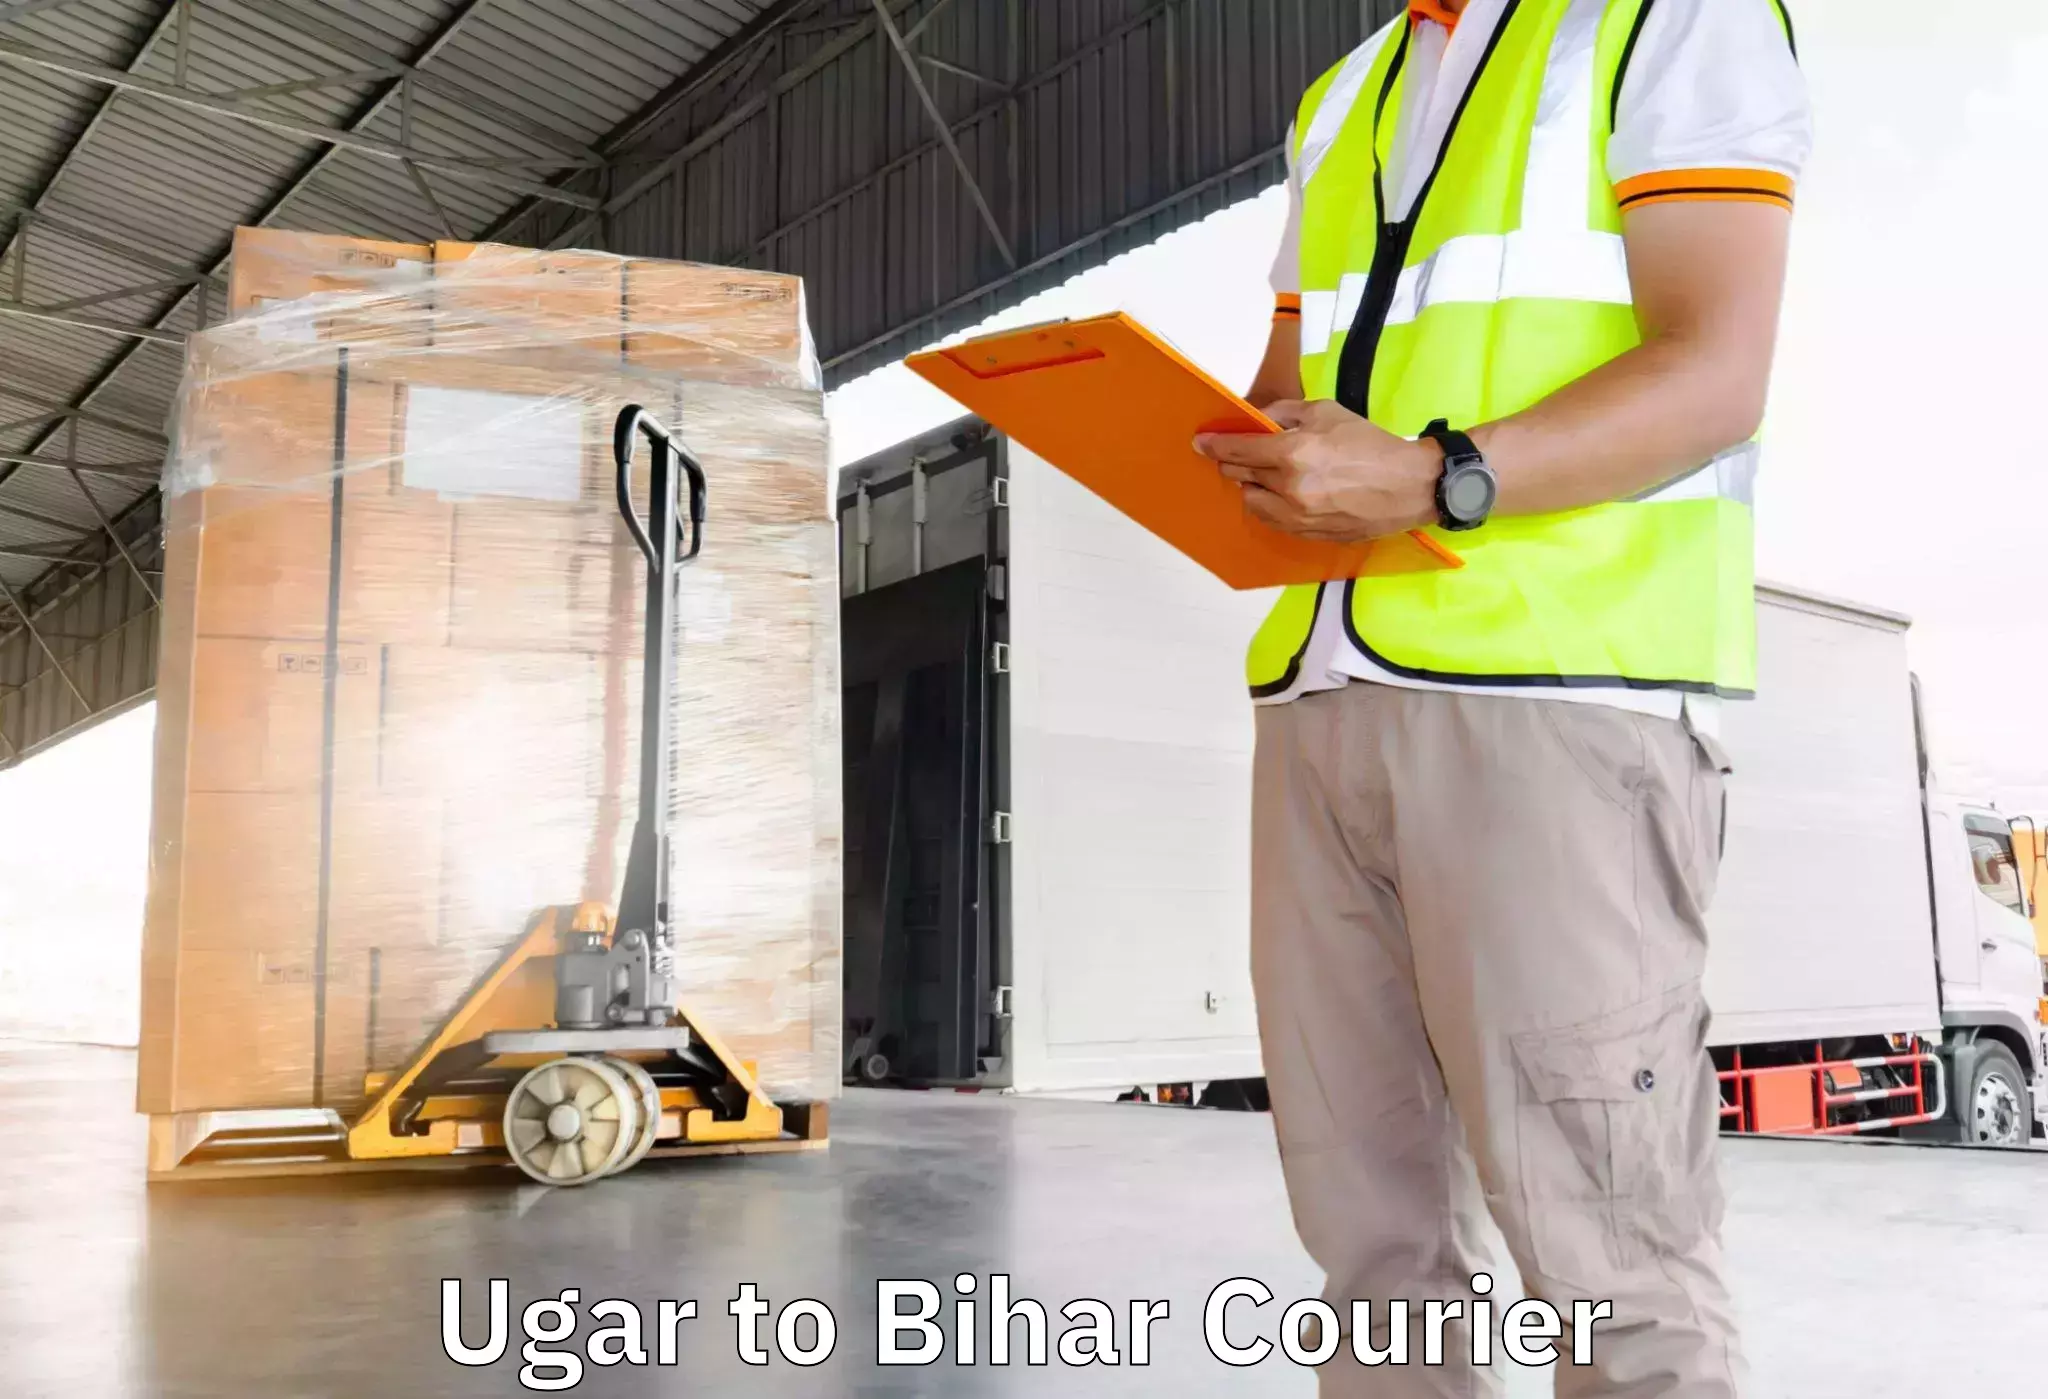 Professional movers and packers Ugar to Fatwah